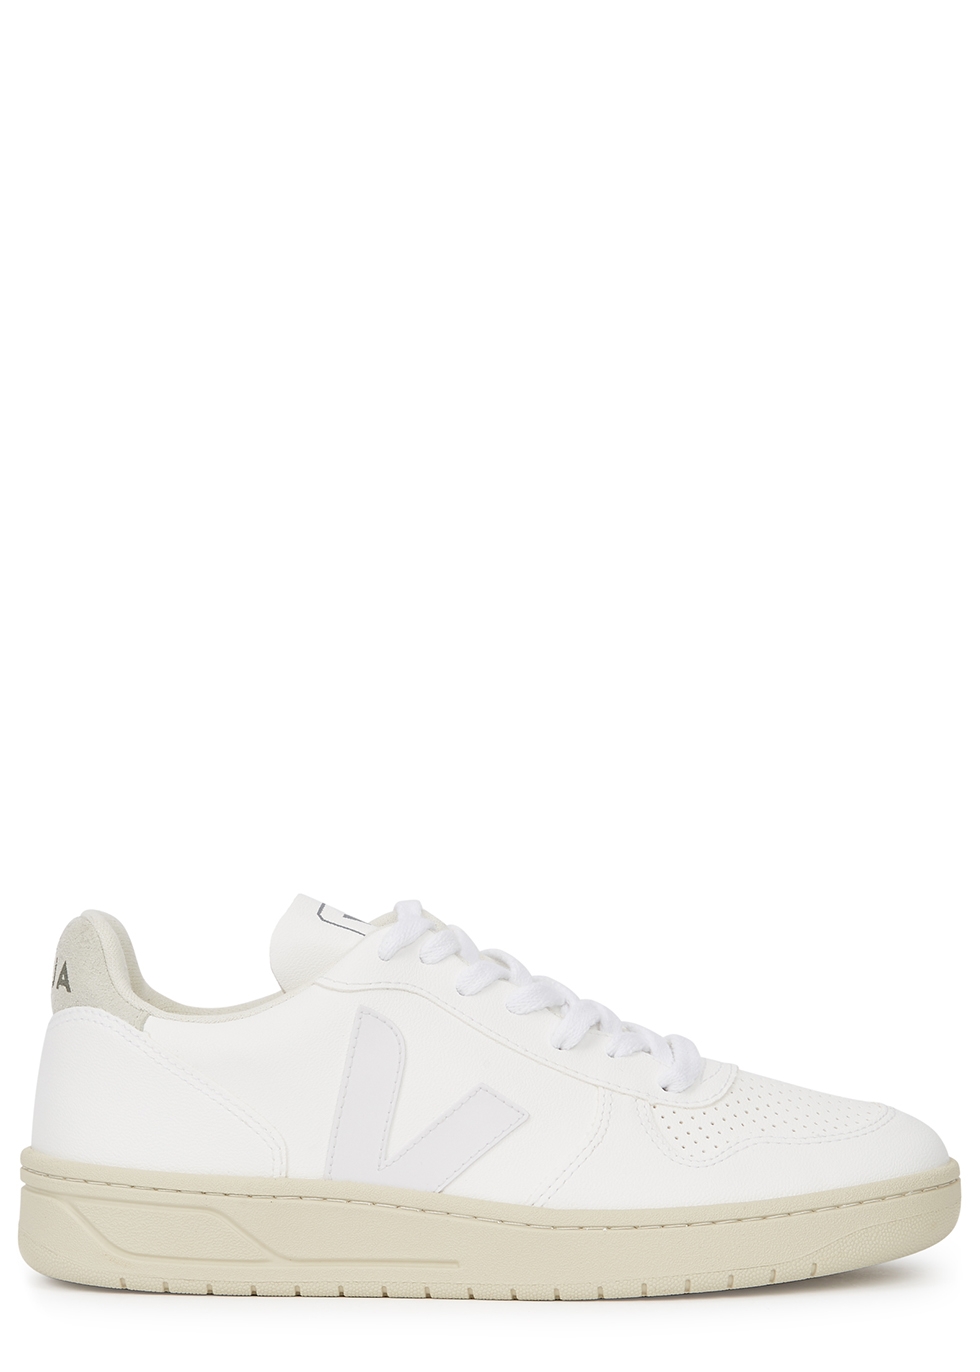 Veja Campo white leather sneakers 